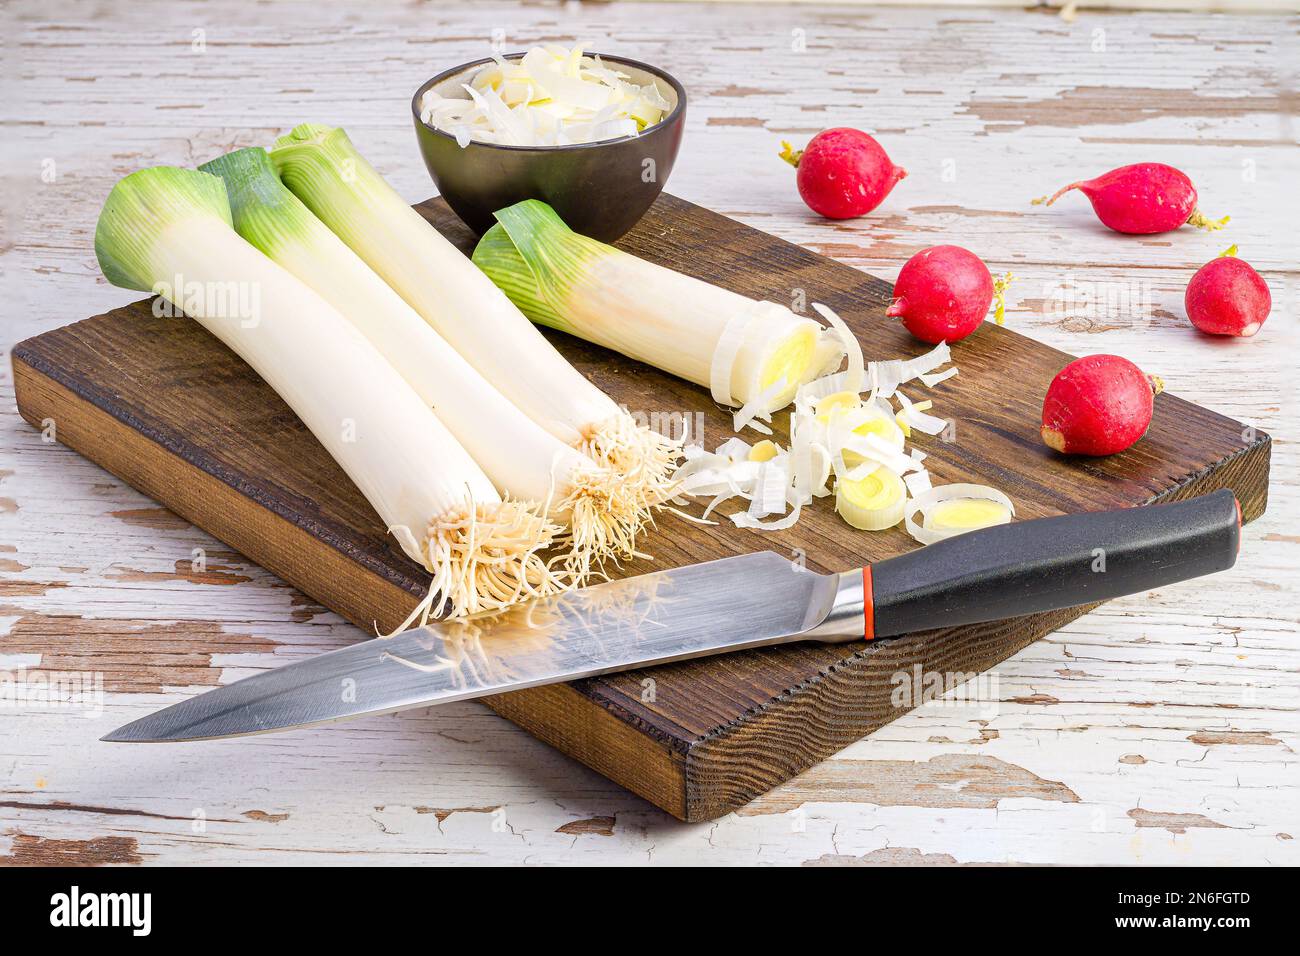 Some leeks on a wooden board with a knife and radishes around Stock Photo